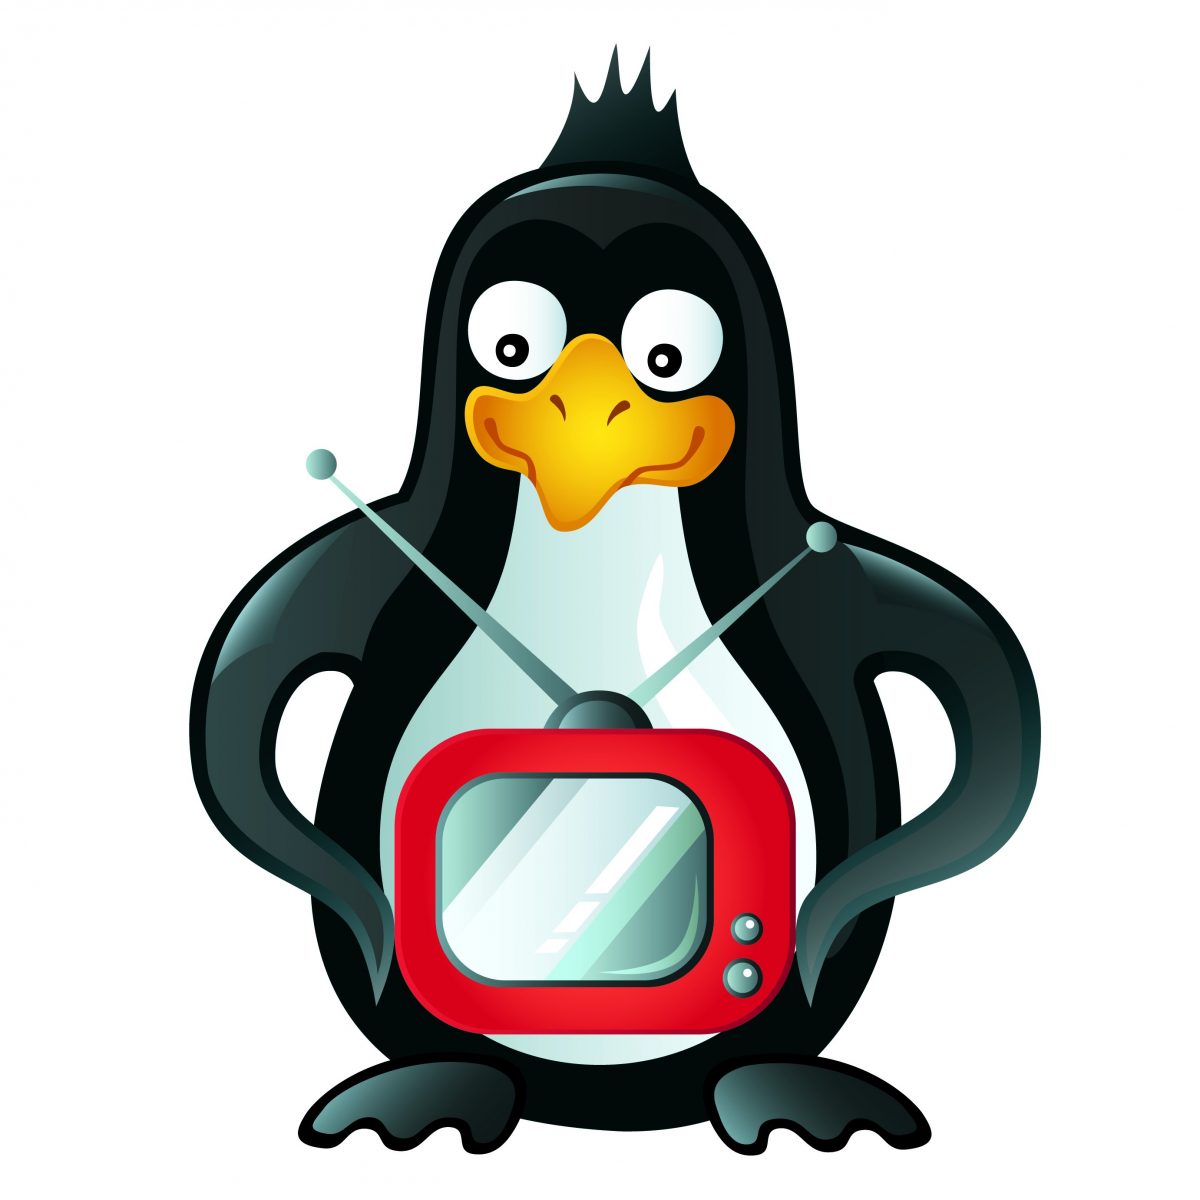 build a small linux media center pc